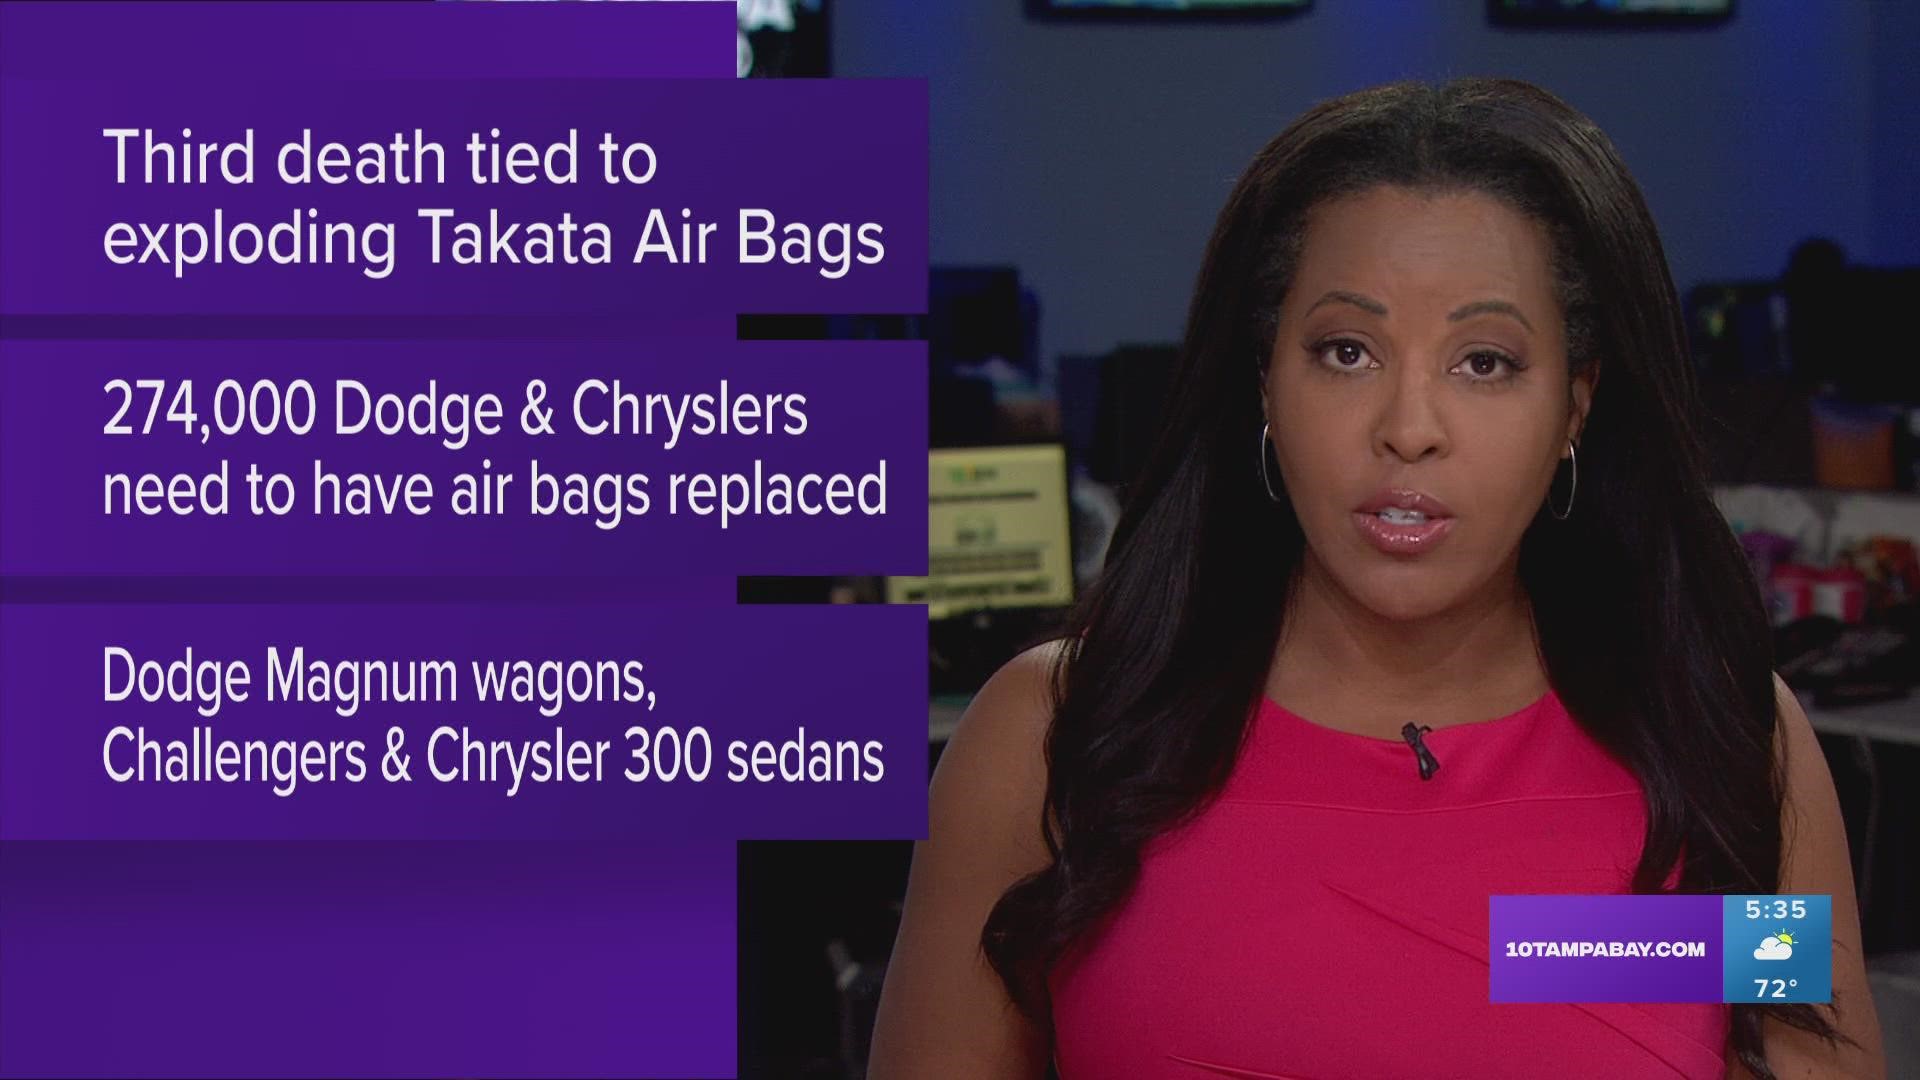 Since 2009, exploding air bags have killed at least 33 people worldwide, including 24 in the United States.